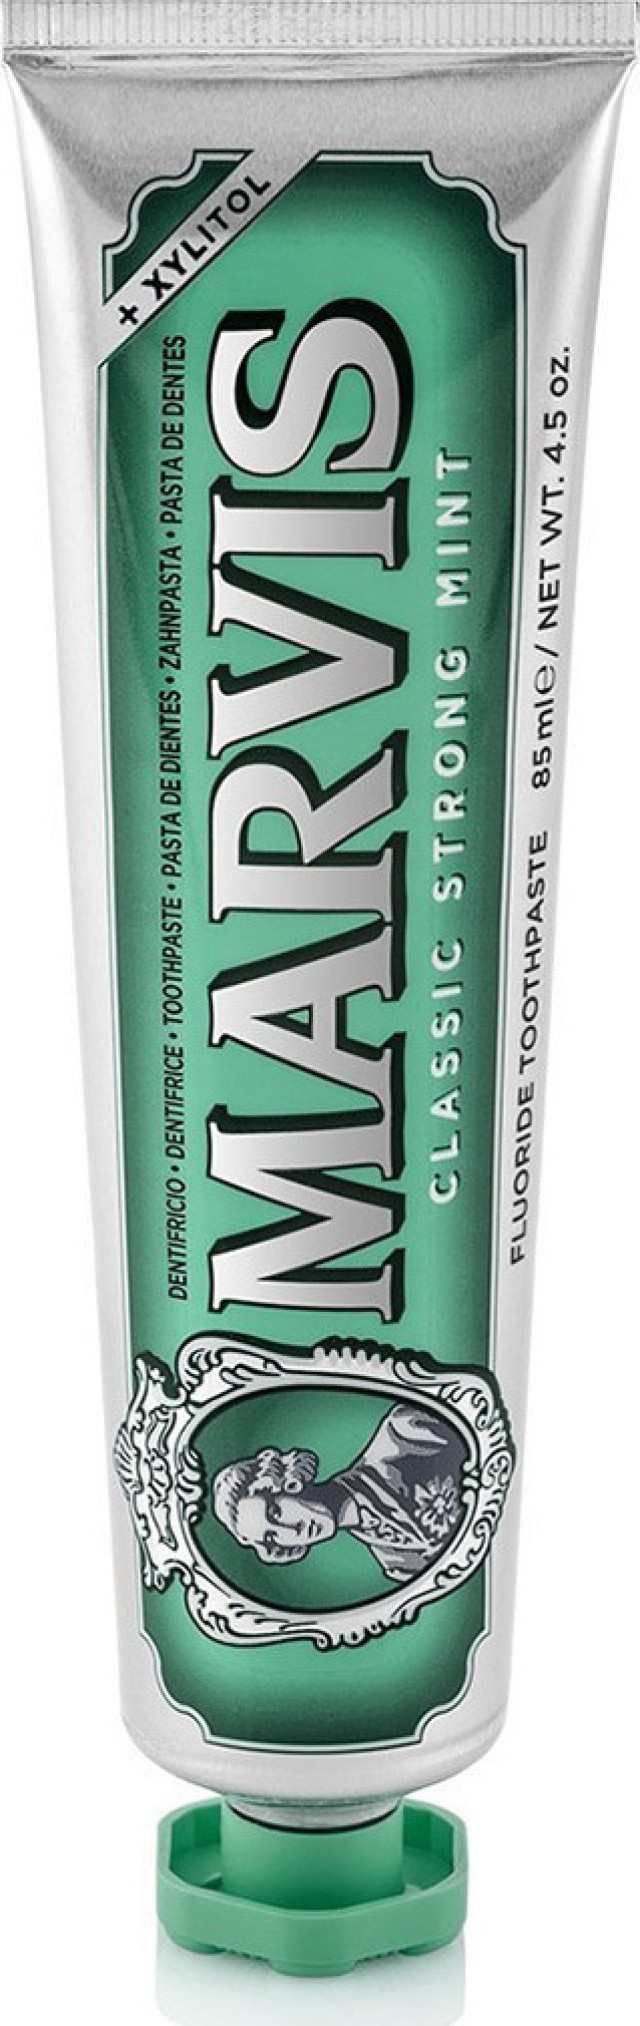 Marvis Classic Strong Mint Toothpaste Οδοντόκρεμα με Γεύση Μέντας για Λεύκανση και Δροσερή Αναπνοή 85ml